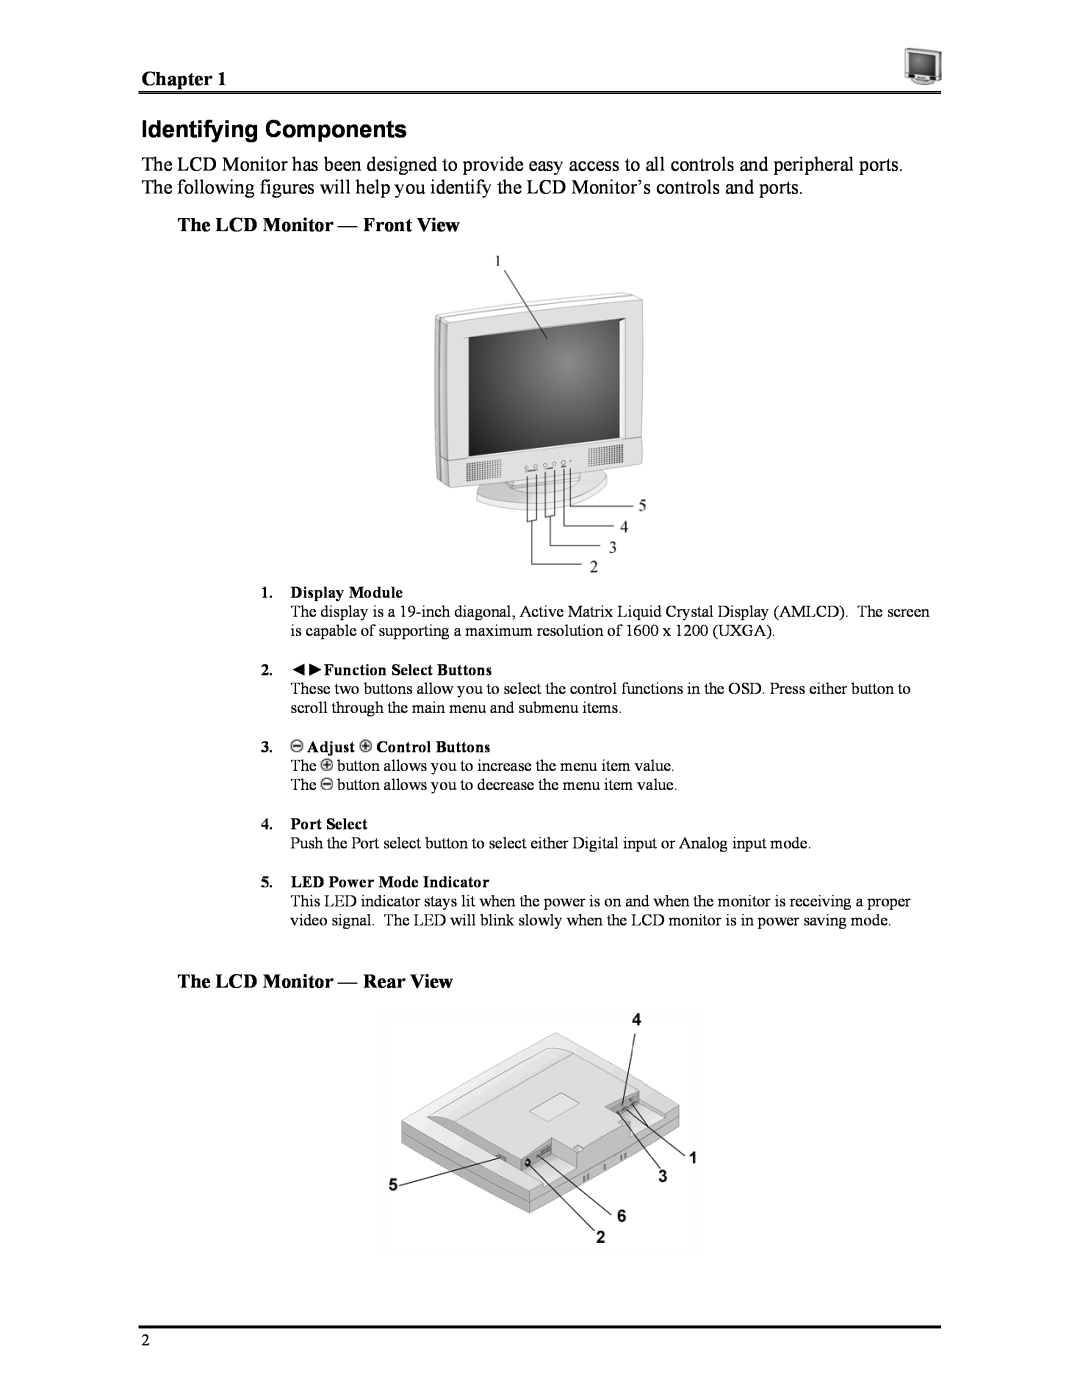 Planar CT1905S Identifying Components, Chapter, The LCD Monitor - Front View, The LCD Monitor - Rear View, Display Module 